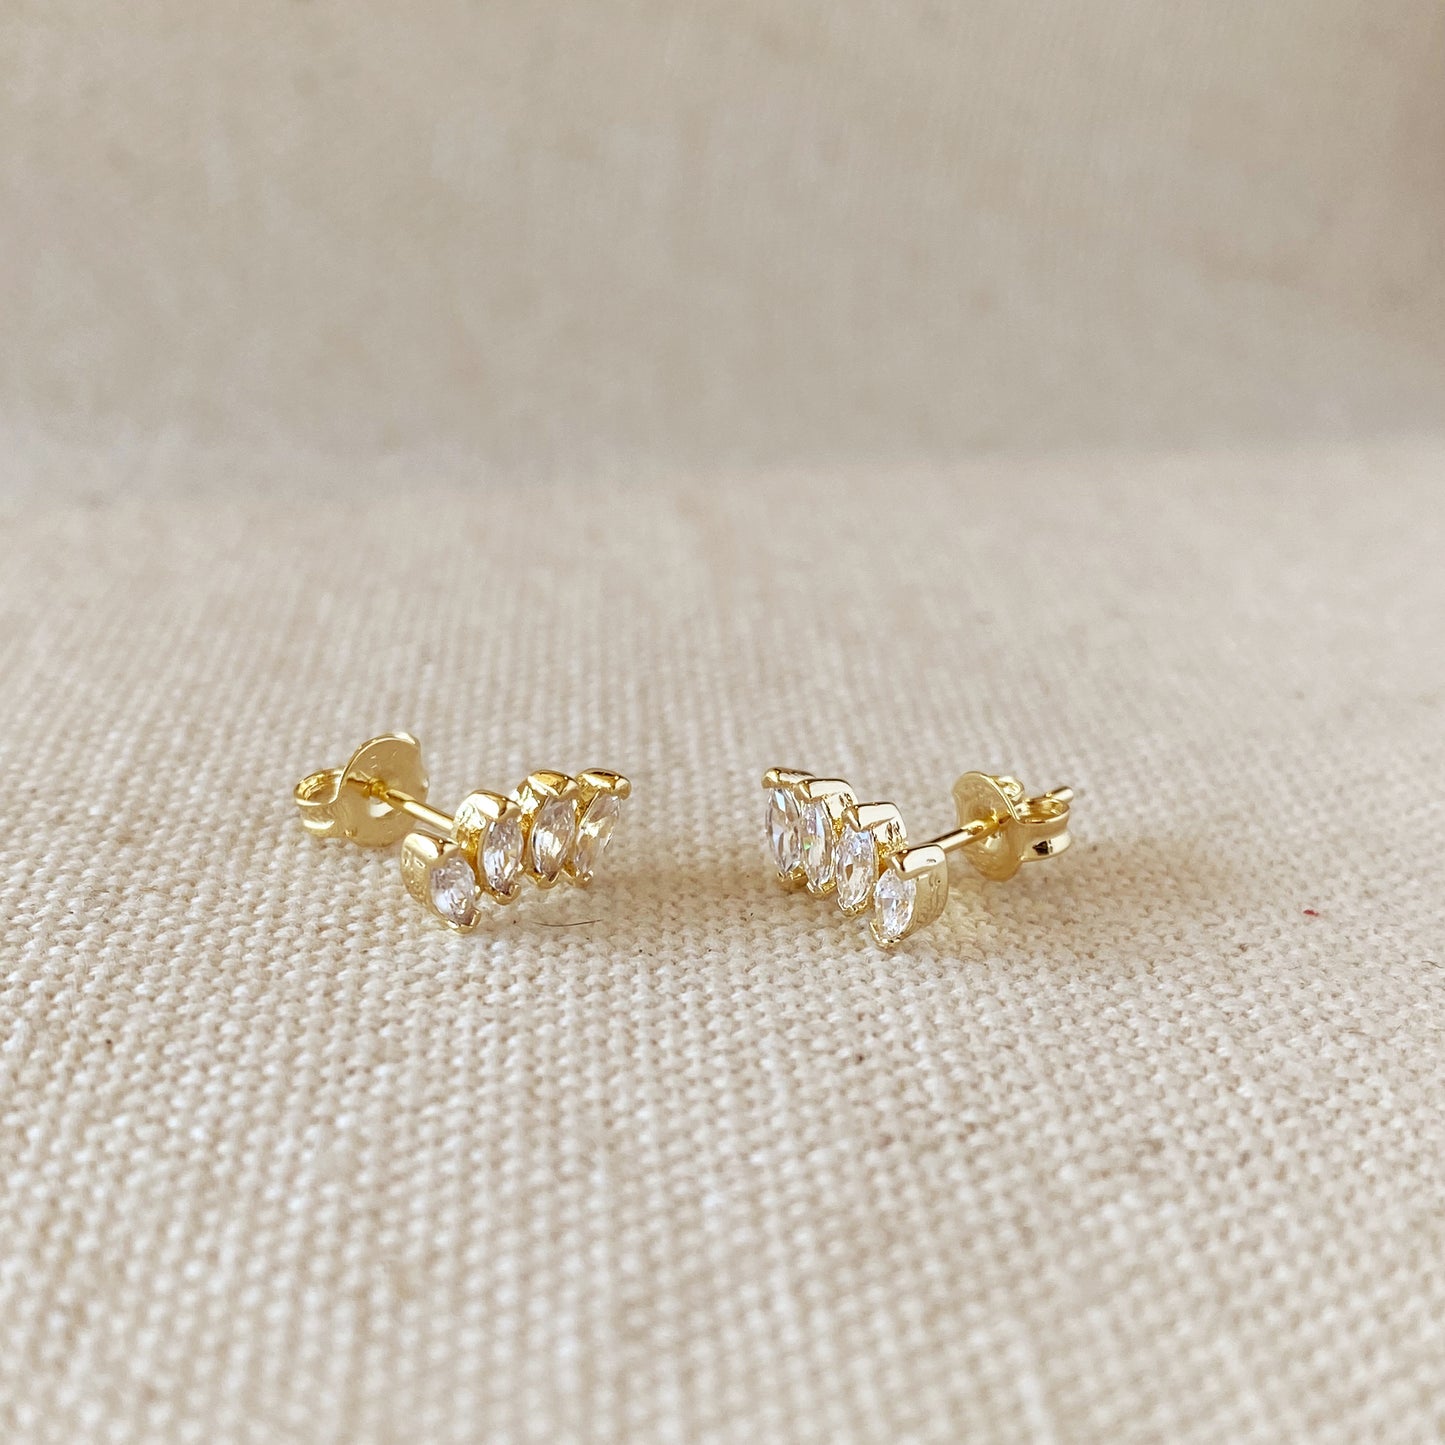 18k Gold Filled Slightly Curved Cubic Zirconia Stud Earrings